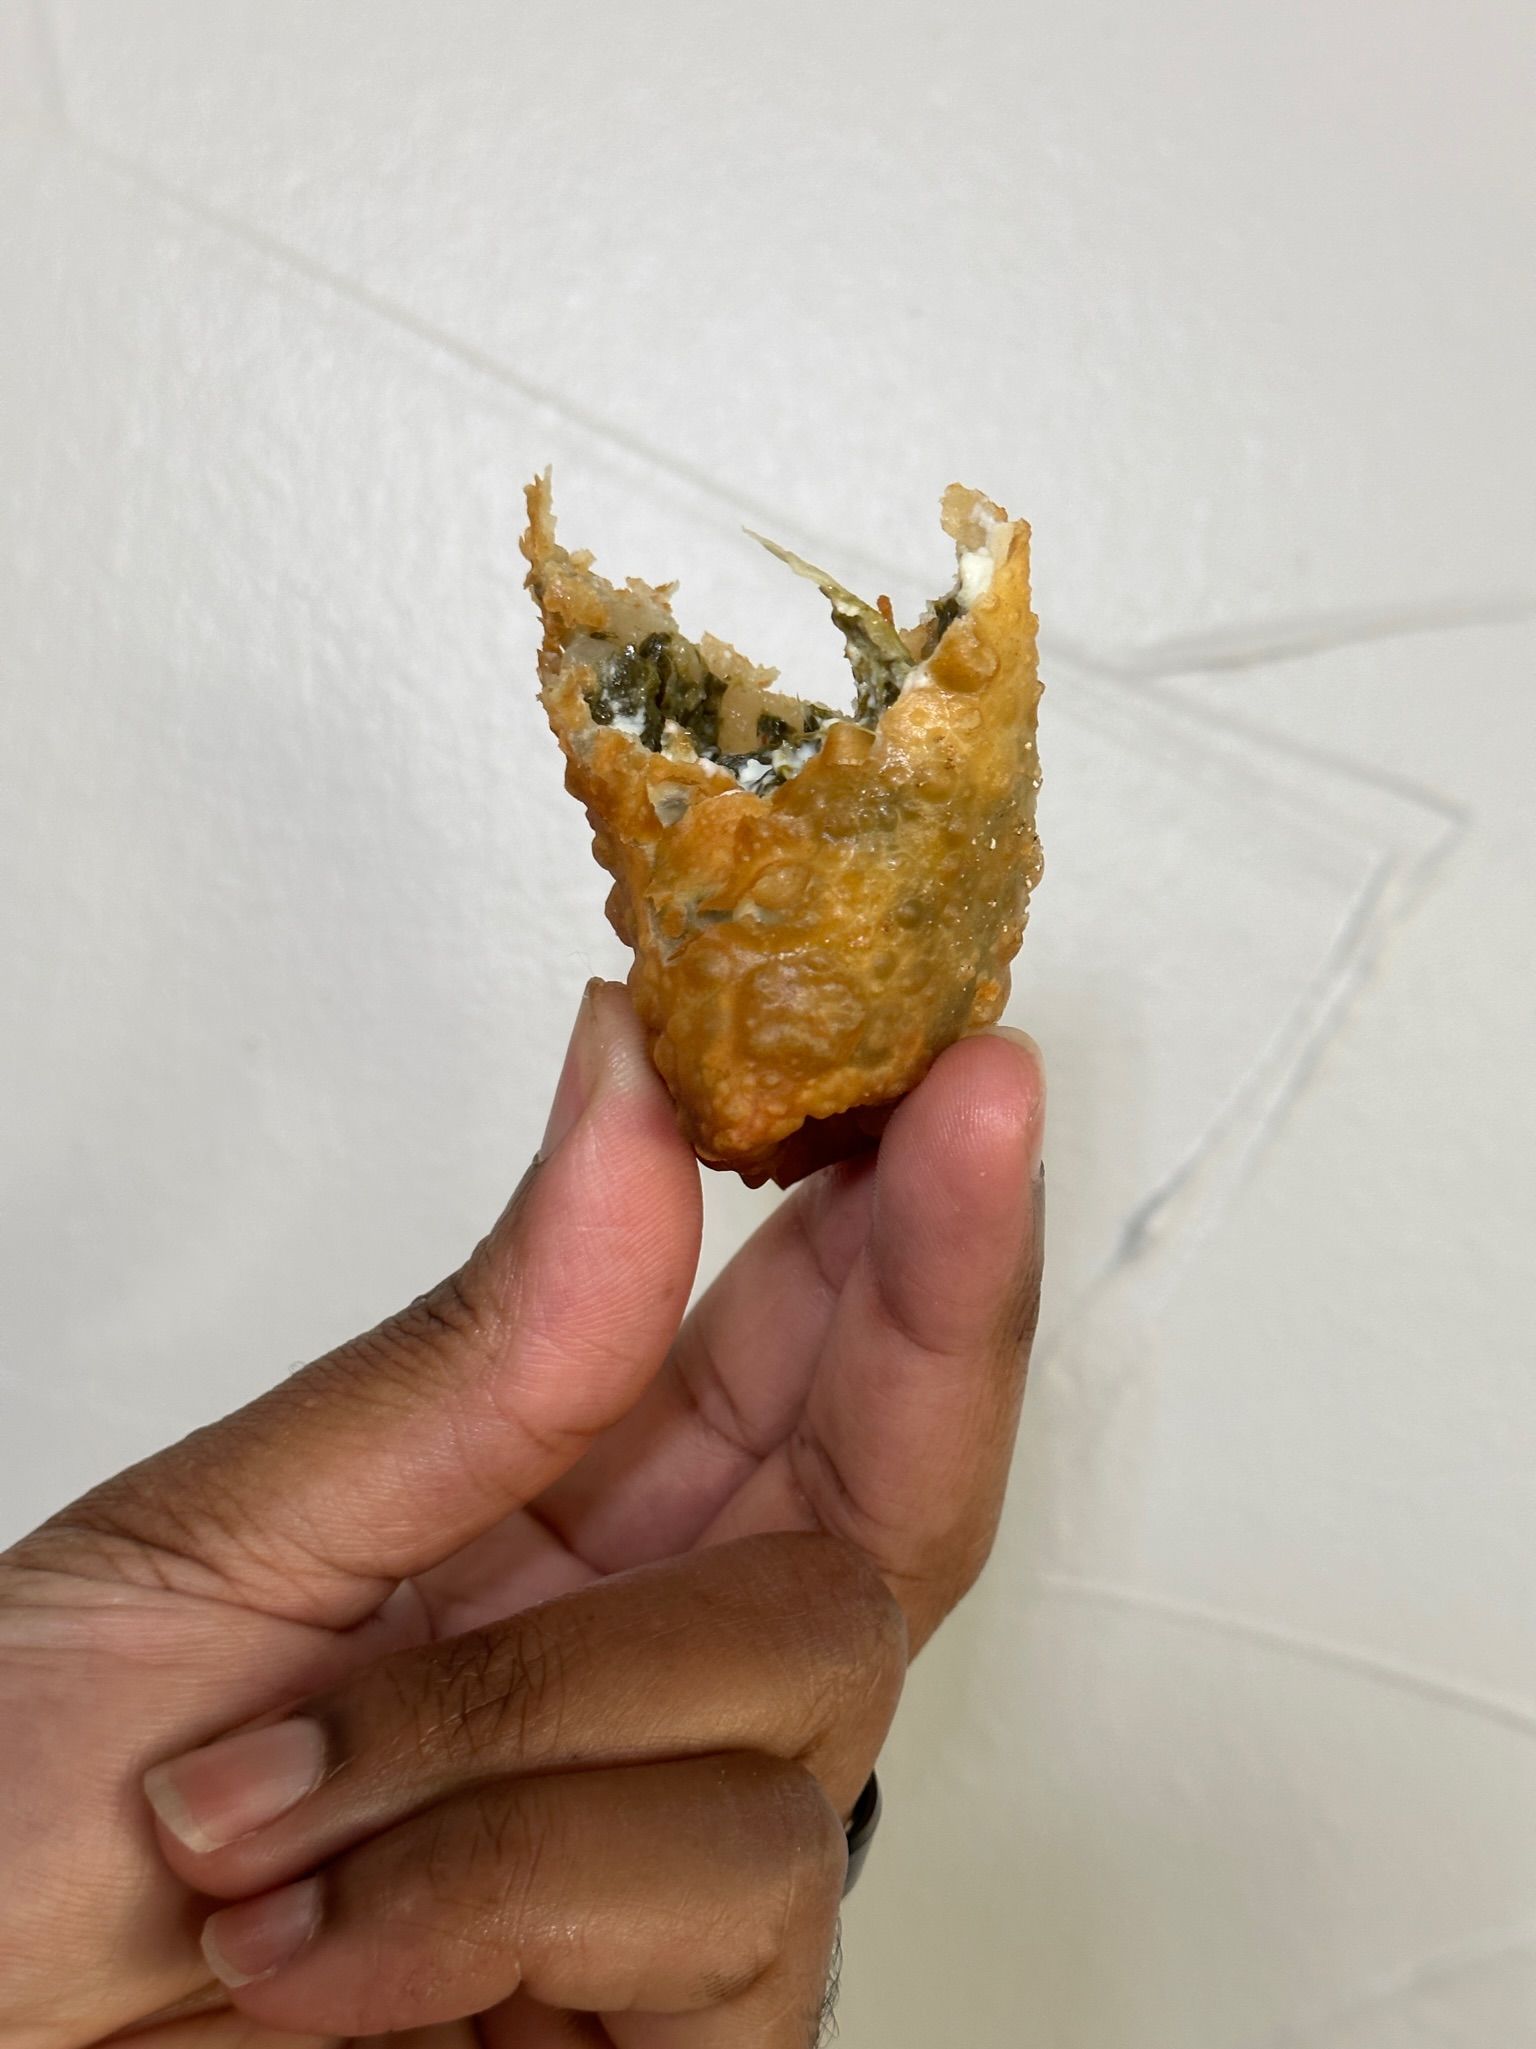 A person is holding a fried food item with a bite taken out of it